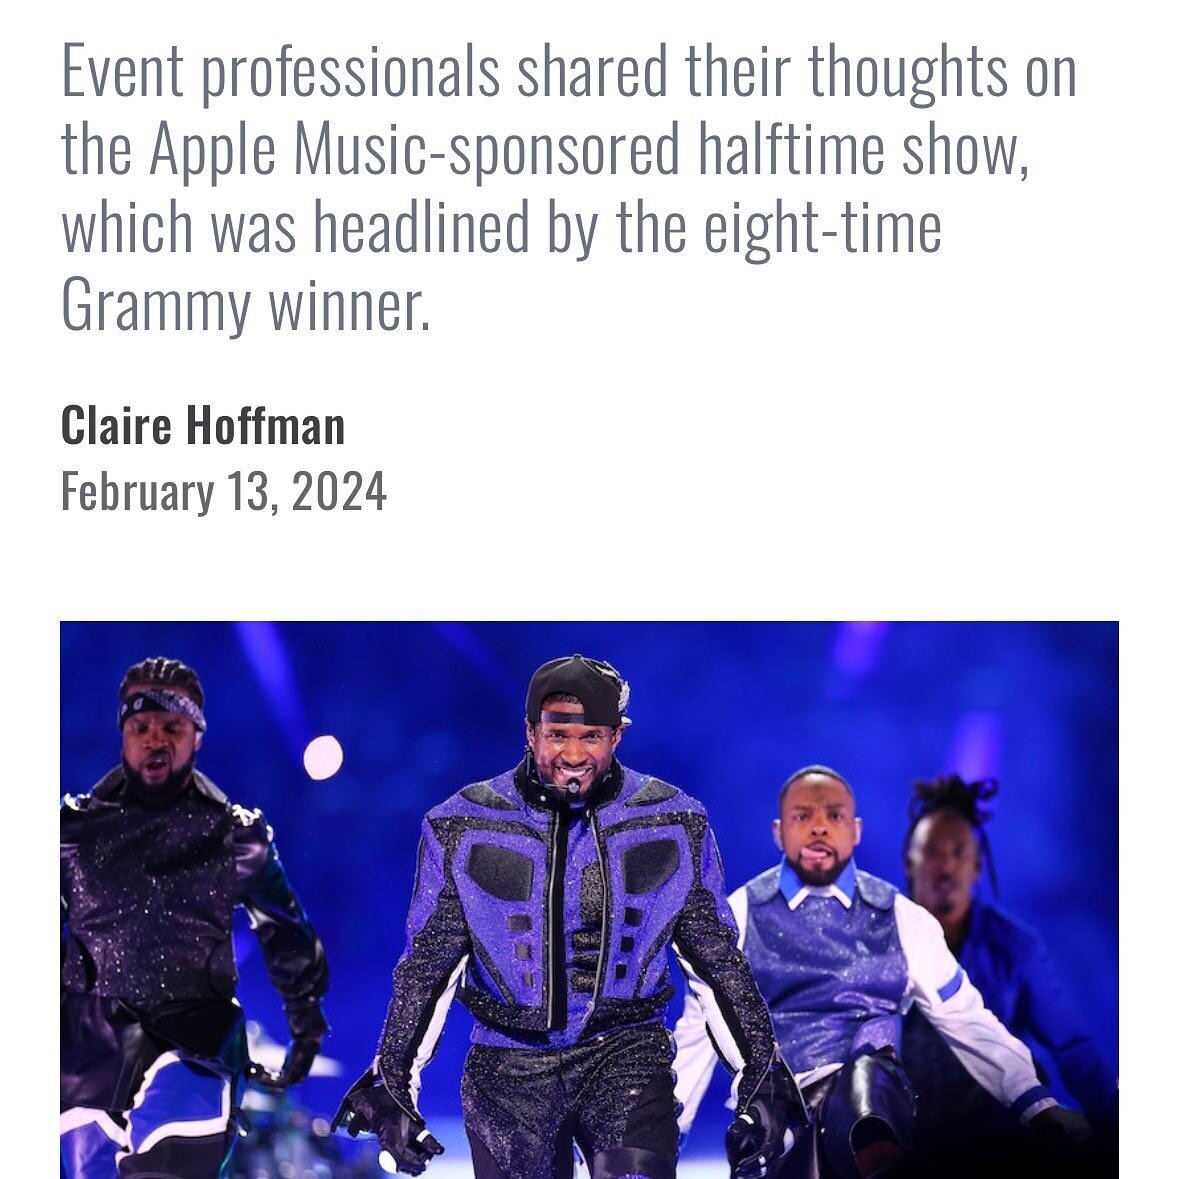 Let&rsquo;s talk about Usher baby!!! 
So excited to be included with these event professionals and reading the different perspectives on the production of the half time show. I congratulate the actual producers as it is no easy feat to build a stage 